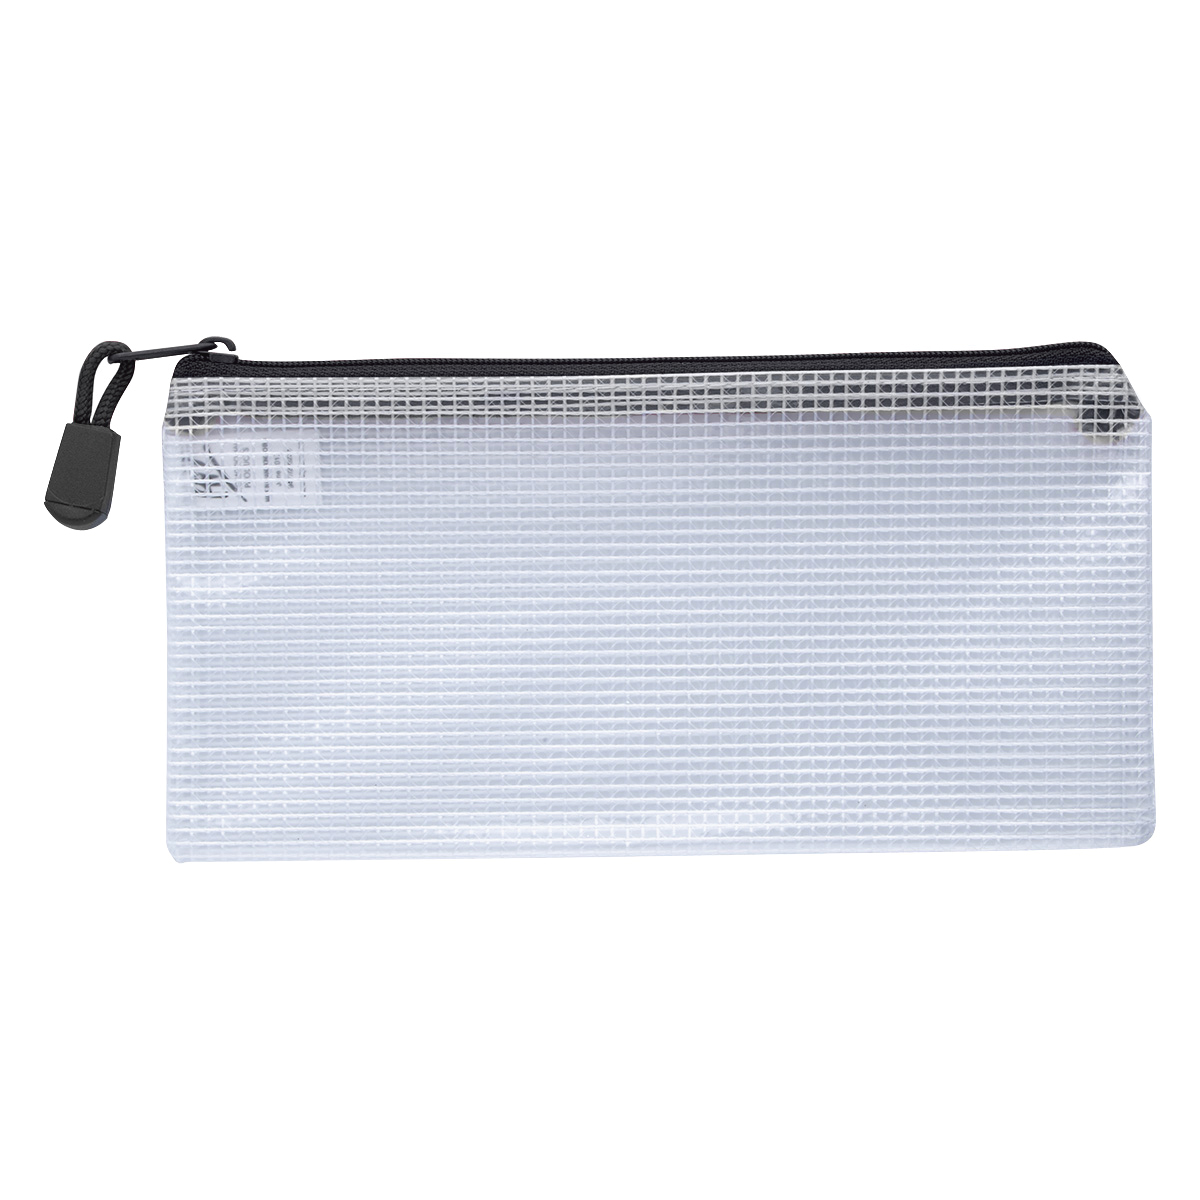 Black Clear Zippered Pencil Pouch